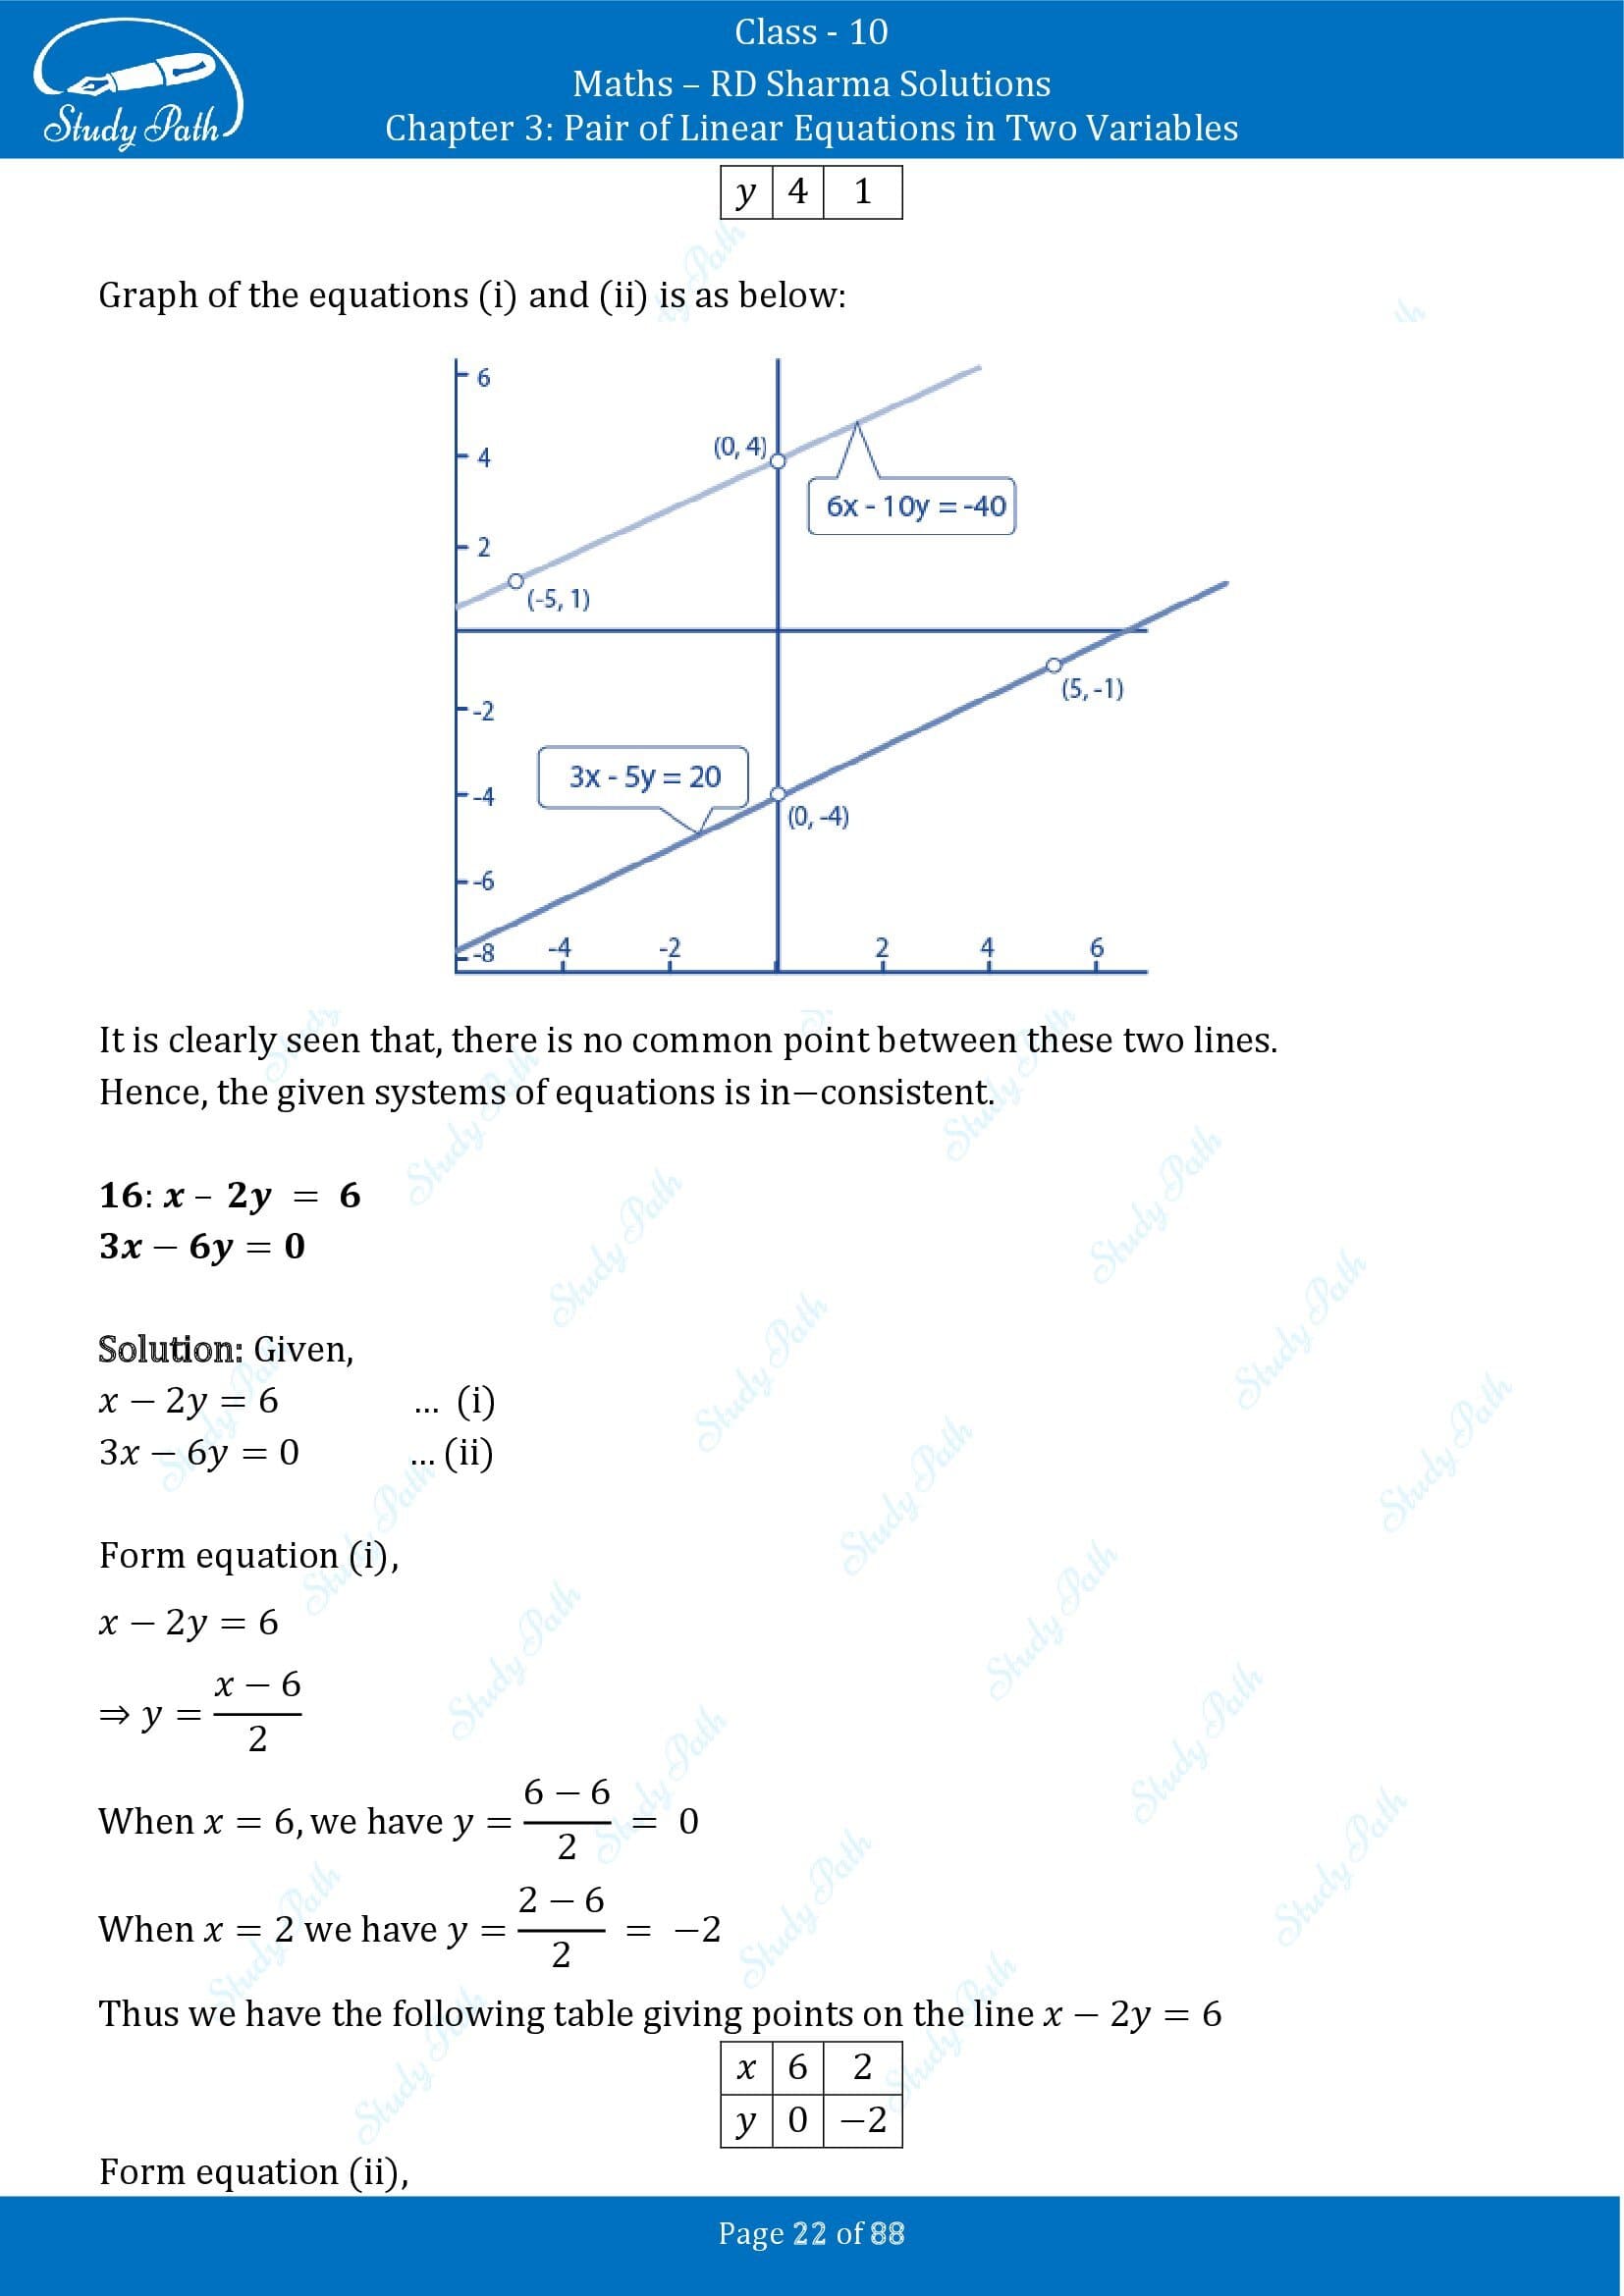 RD Sharma Solutions Class 10 Chapter 3 Pair of Linear Equations in Two Variables Exercise 3.2 00022